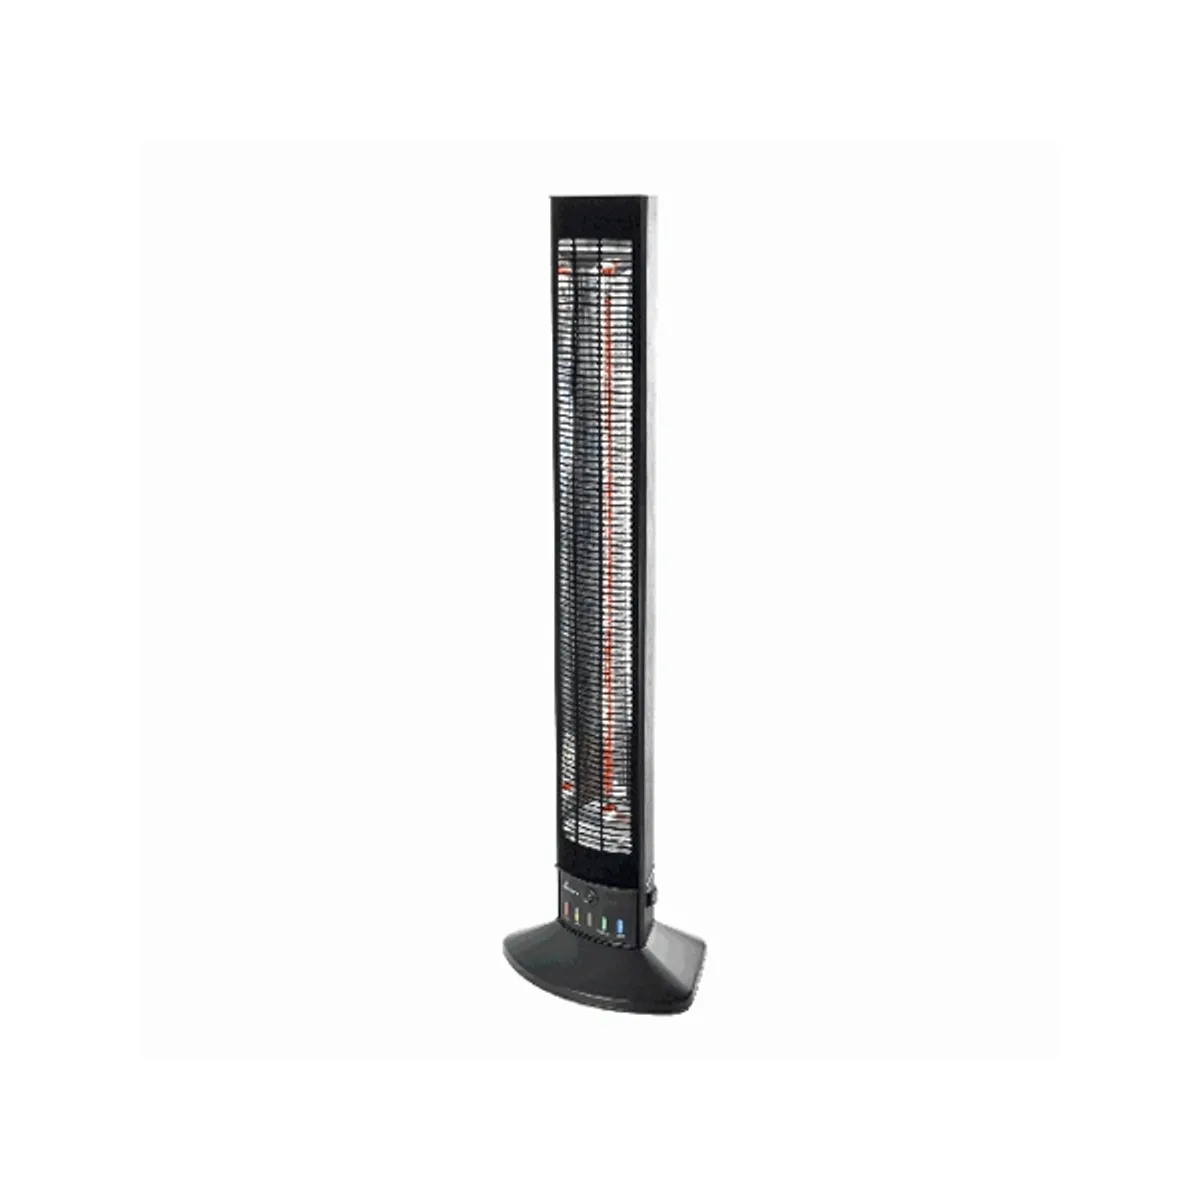 Meri Infrared floor standing heater Inside Out Contracts2